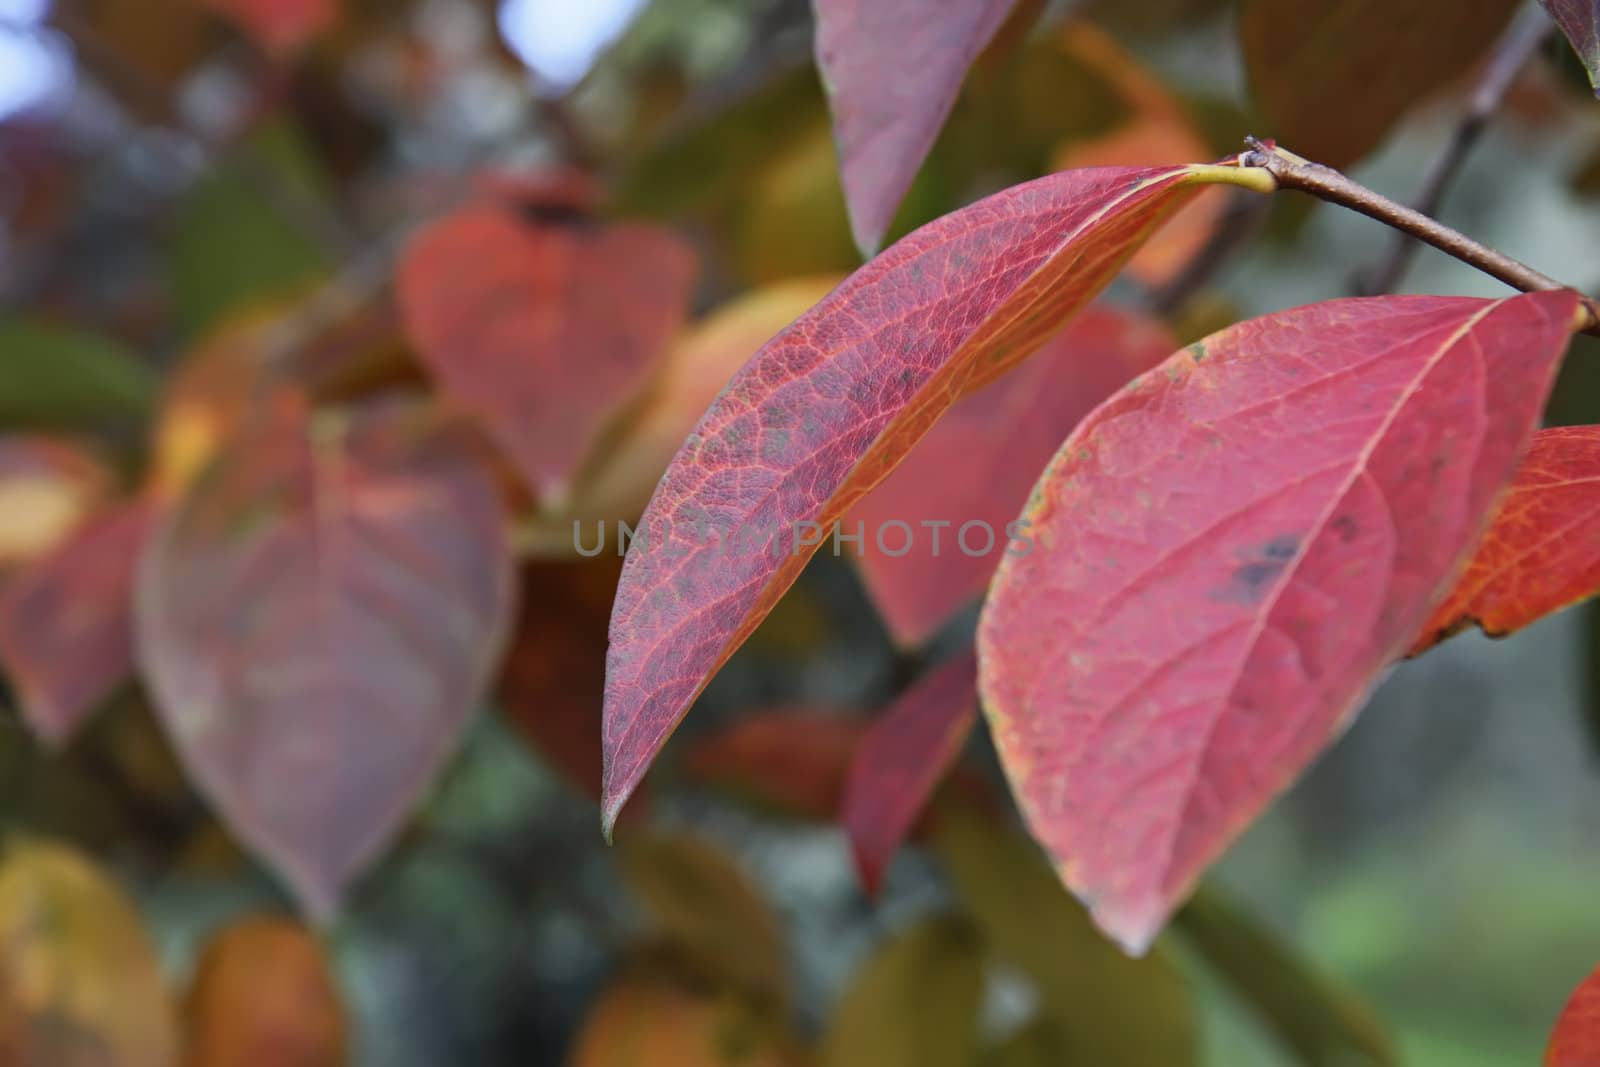 Italy, Lazio, countryside, quince tree leaves in autumn